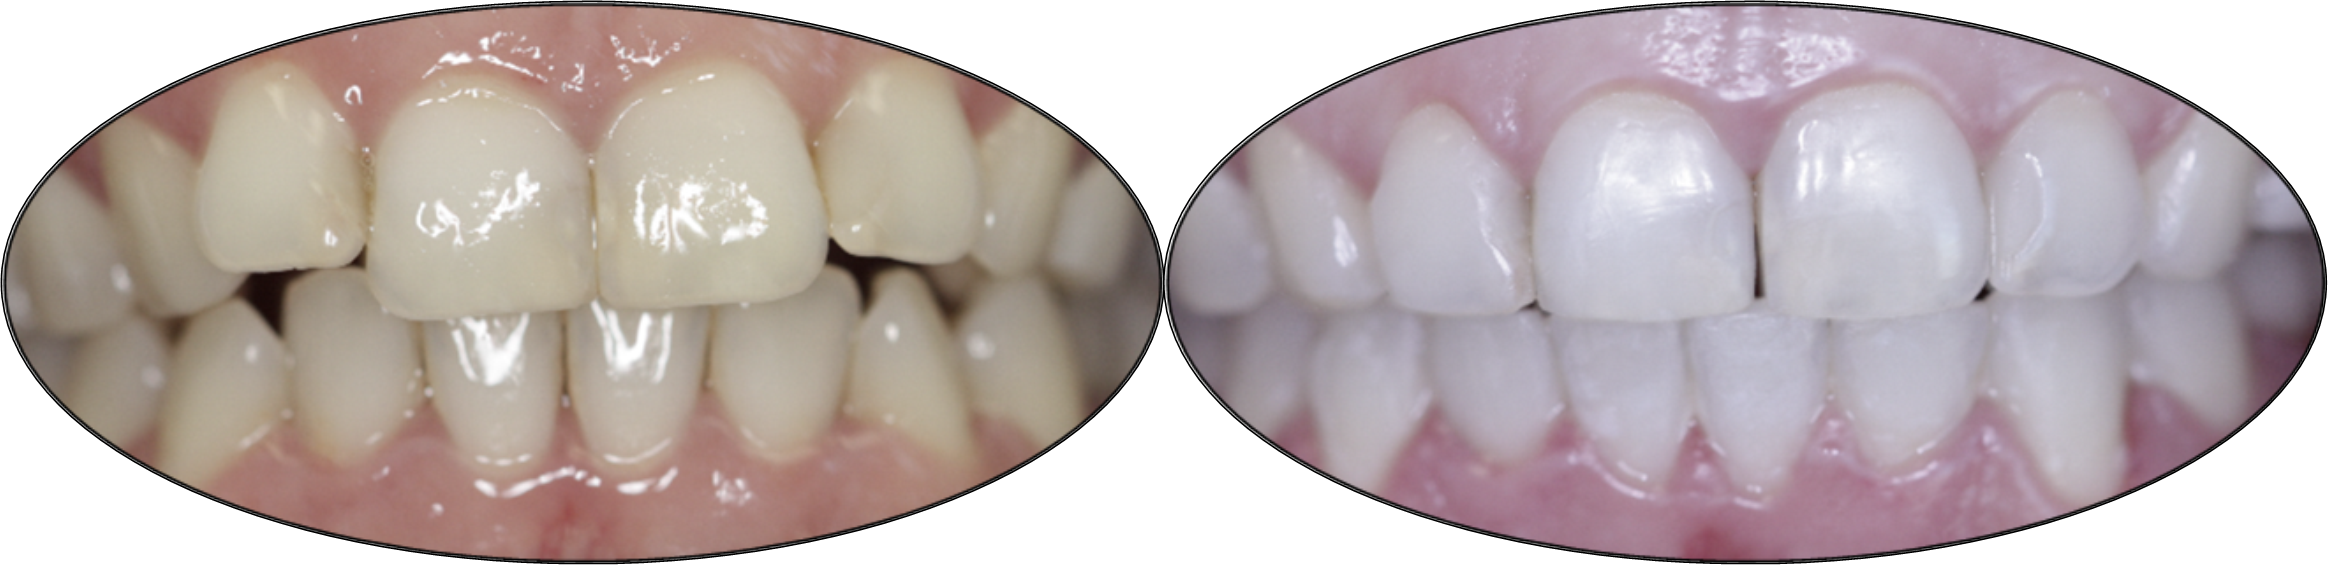 Smile gallery images, before and after orthodontics, patient one